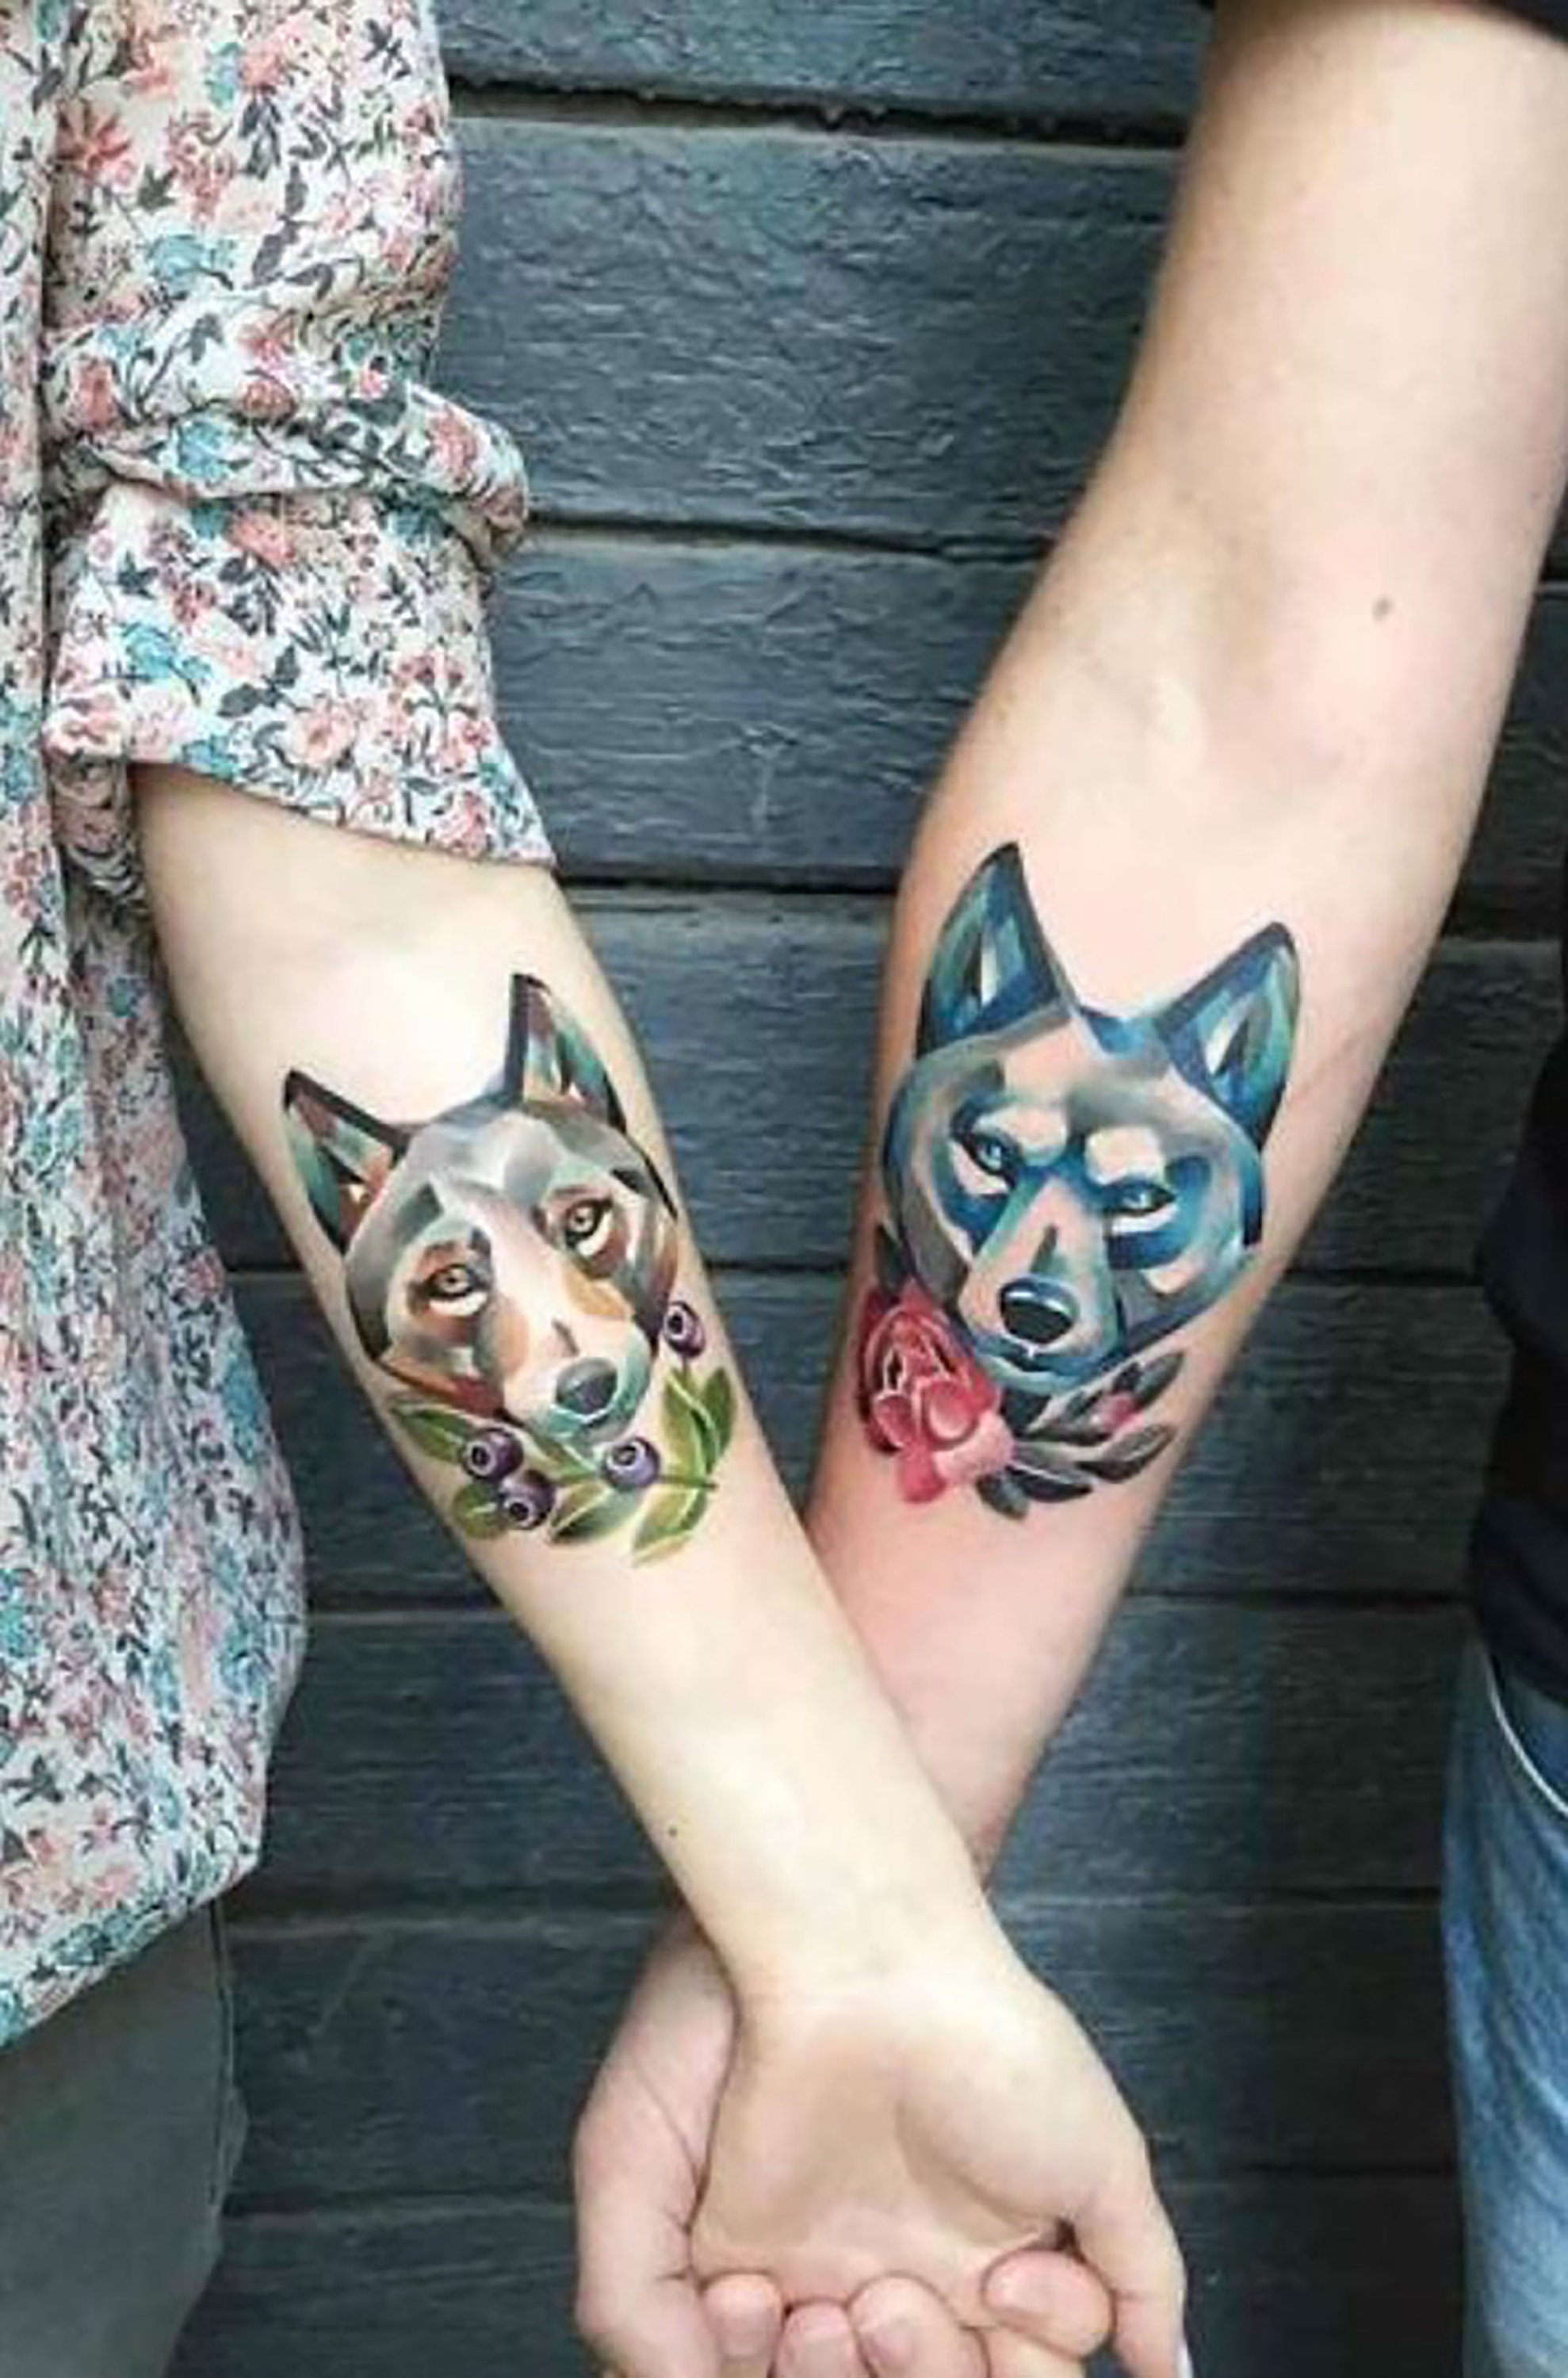 30+ Really Strange And Adorable Wrist Tattoos | Wolf tattoos for women,  Tattoos for women, Simple wolf tattoo